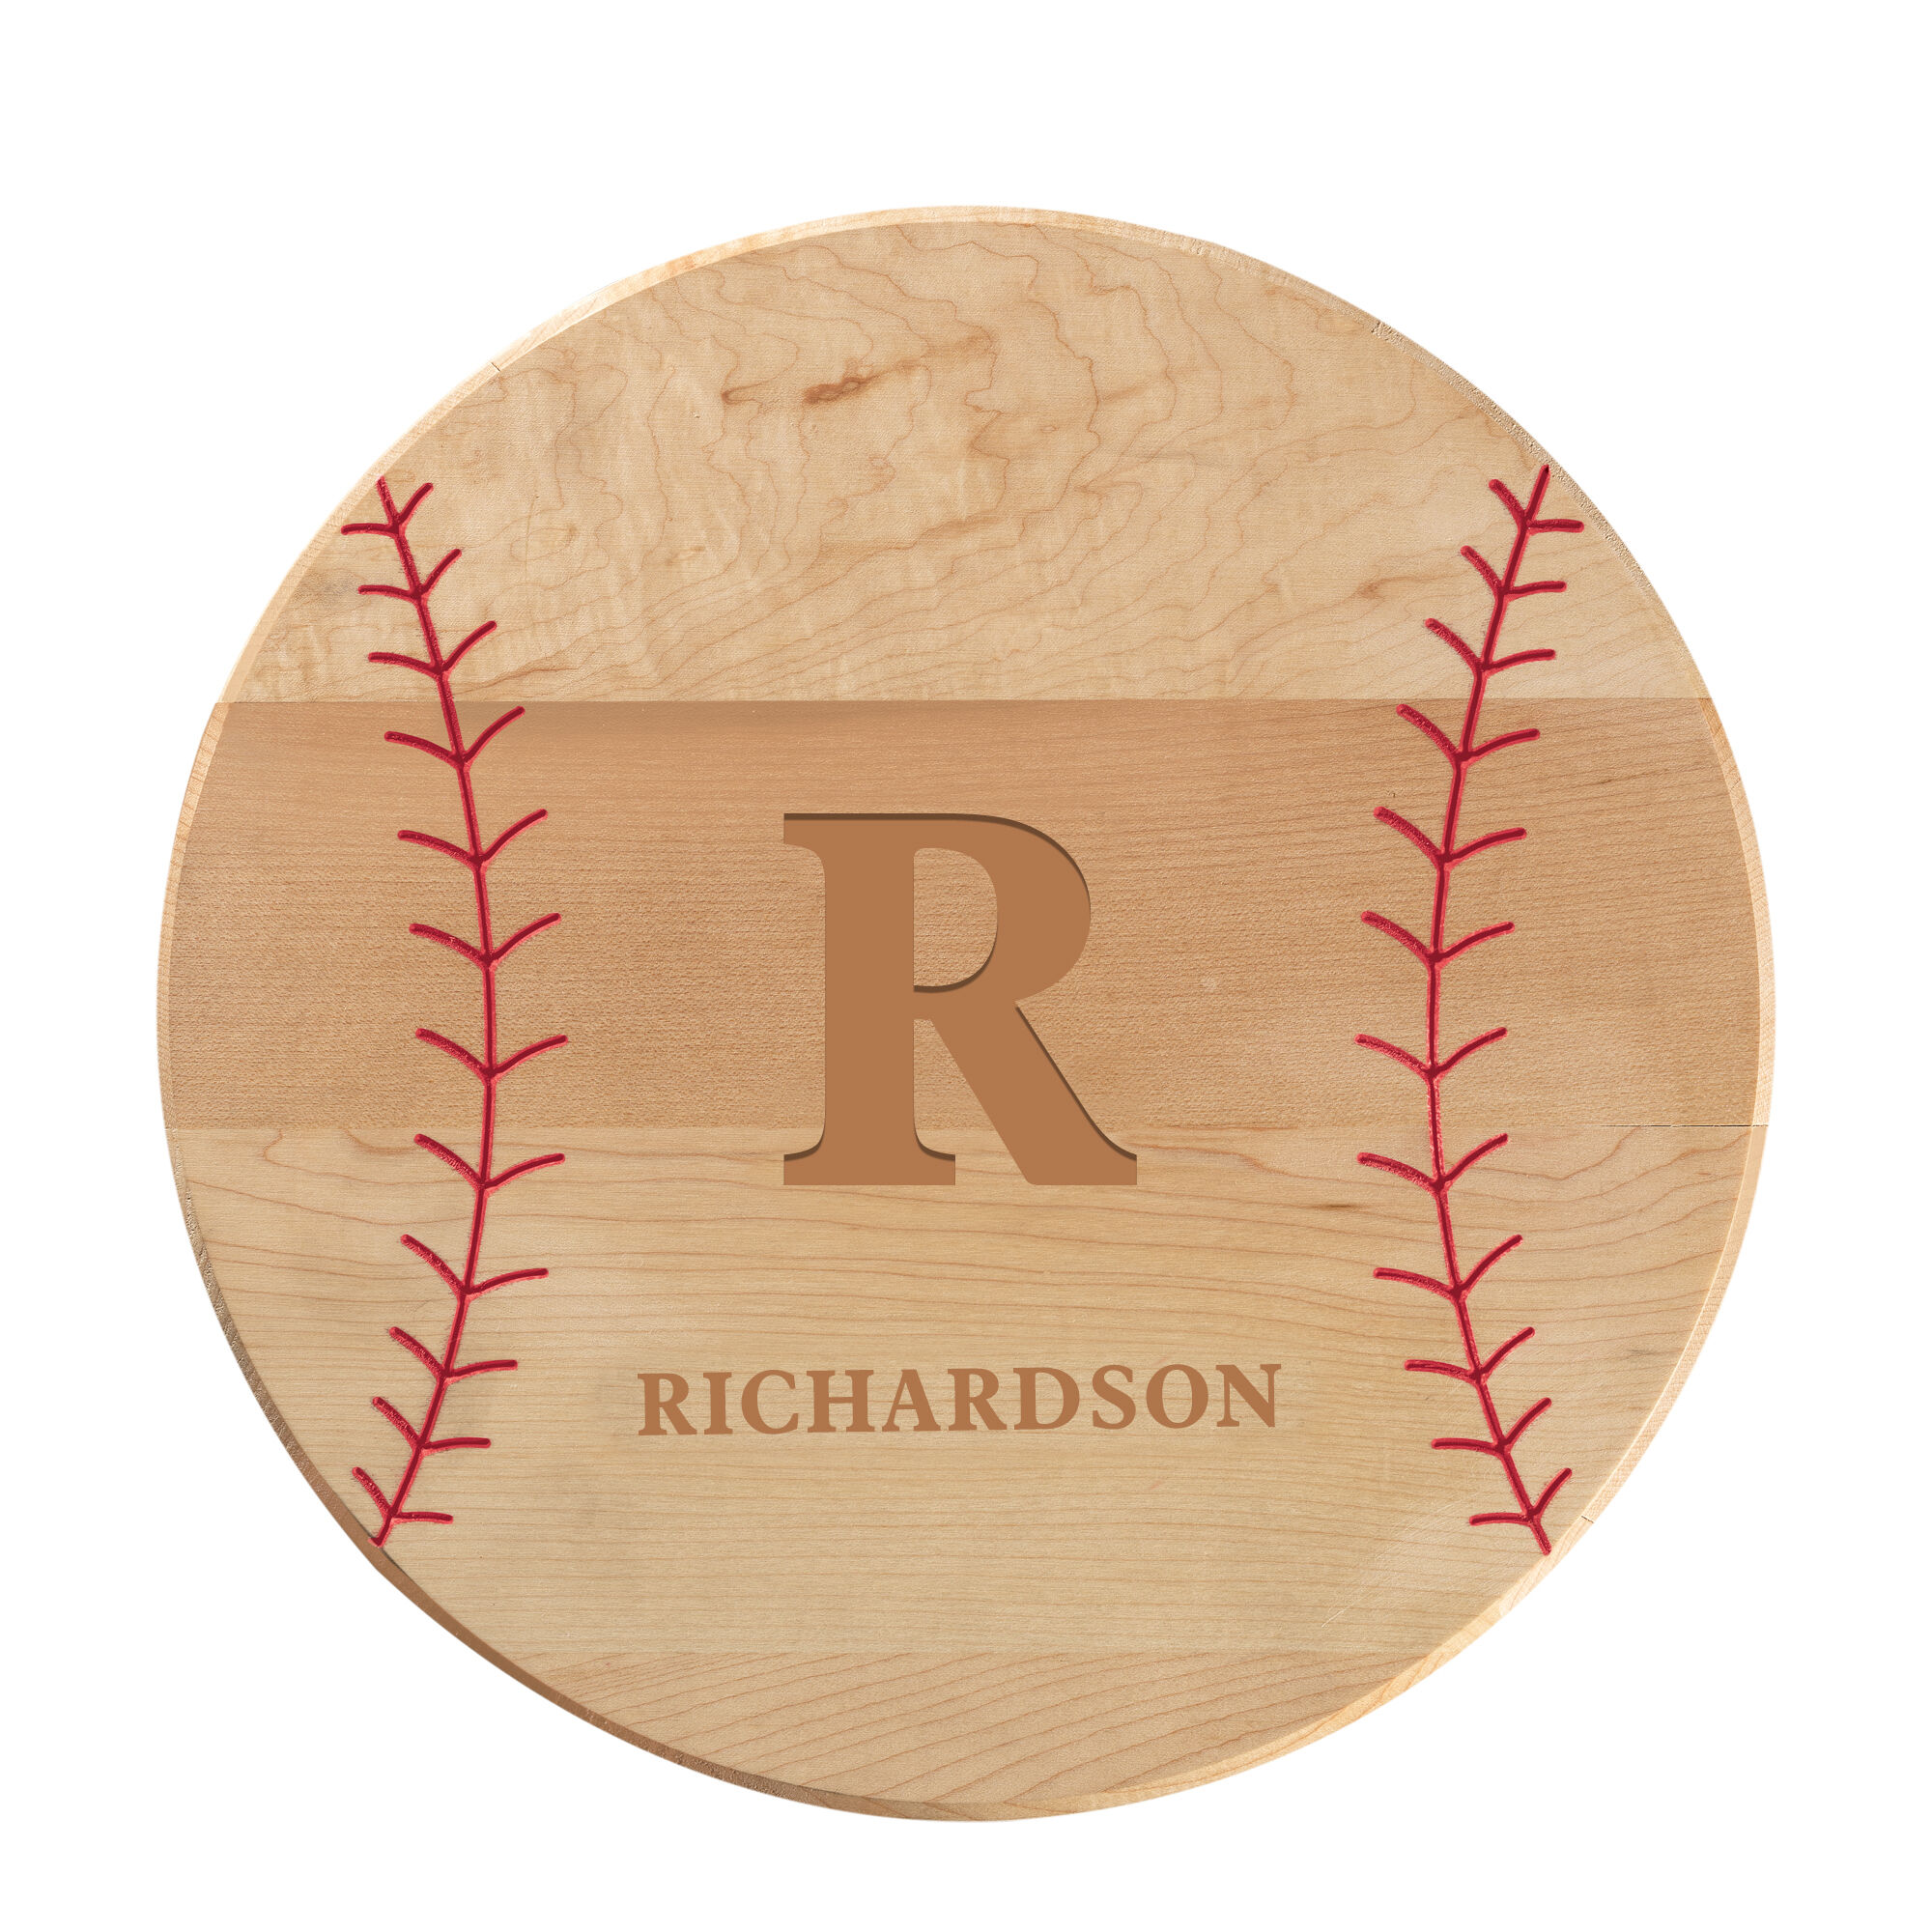 The Personalized Baseball Serving Board 5542 0012 a main